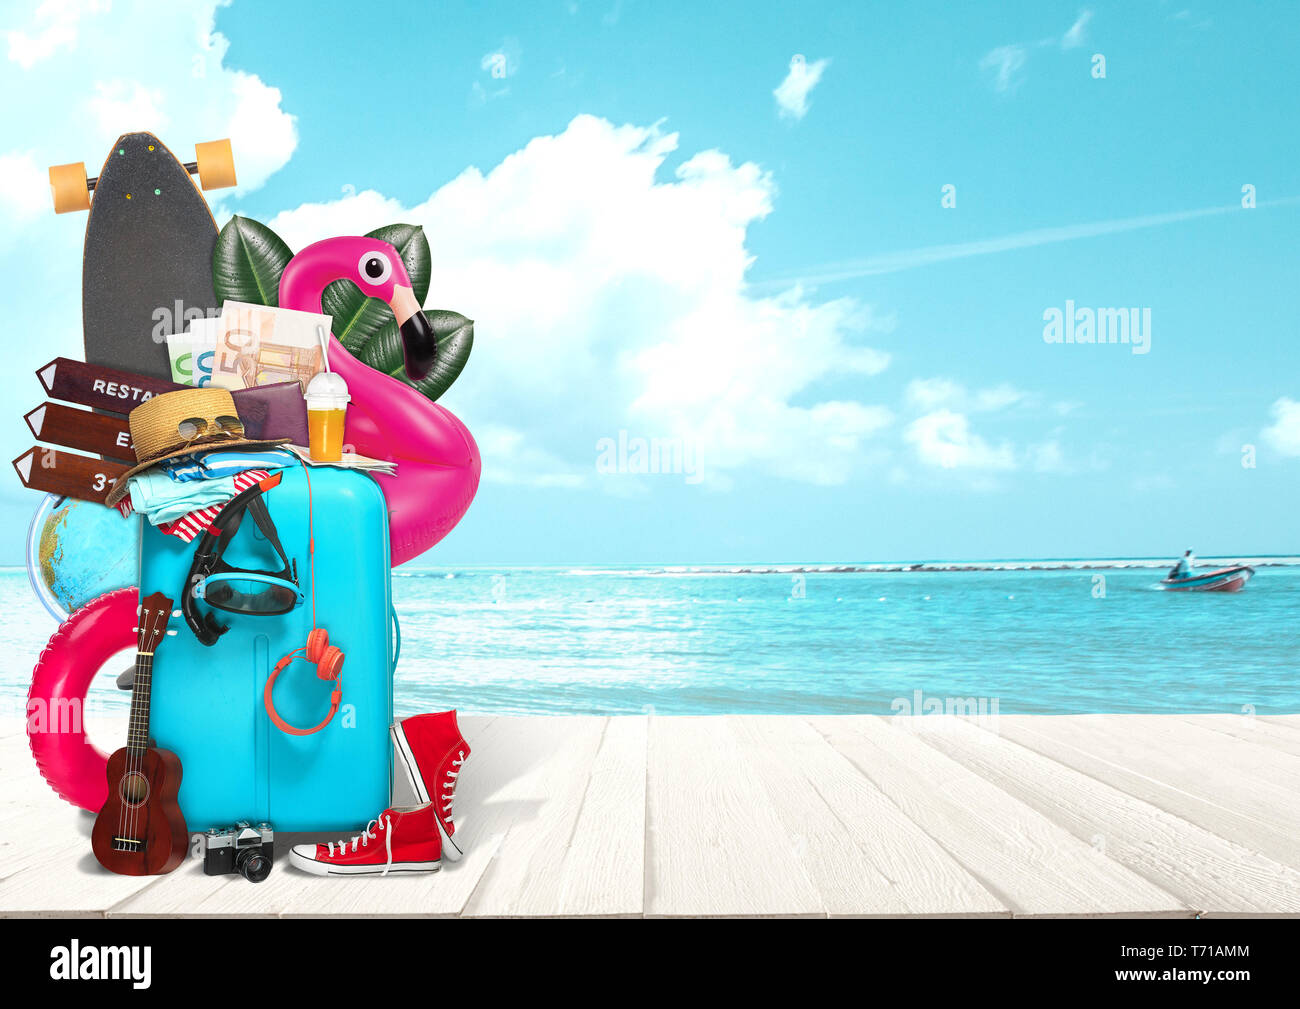 Collage of luggage for travel in front of ocean view. Concept of summertime, resort, journey, trip, travel. Needed things. Skateboard, guitar, camera, headphones, money hat sunglasses clothes Stock Photo